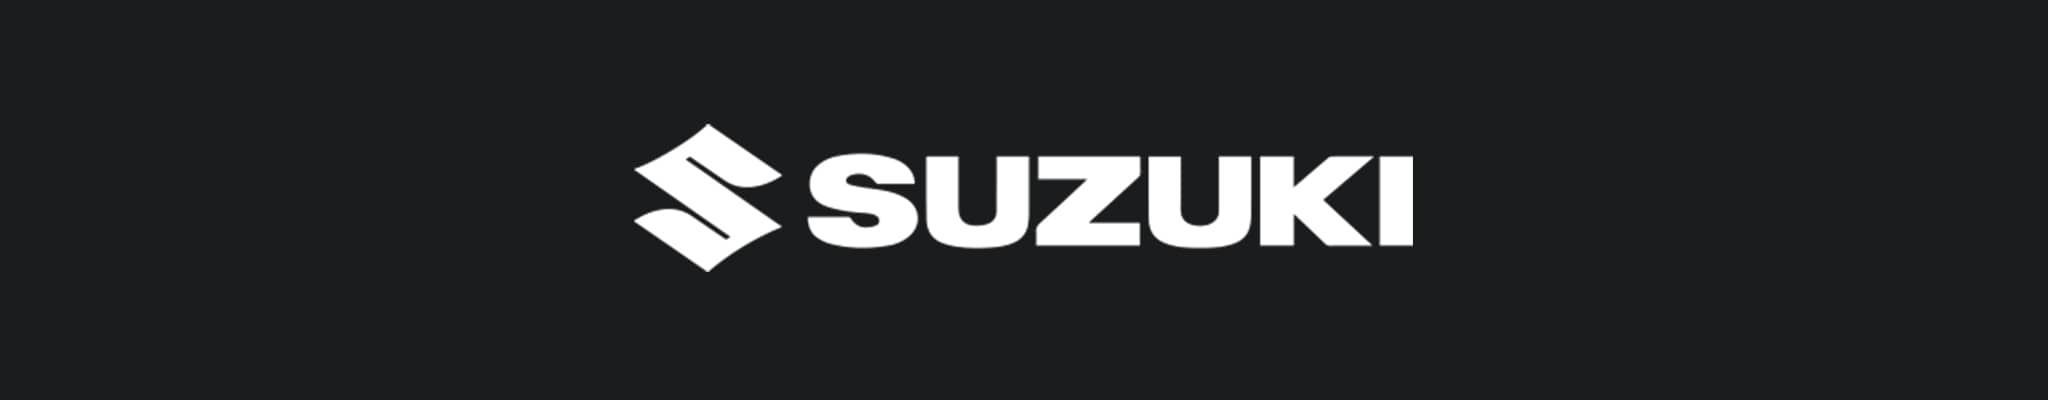 The Suzuki logo in white on a black background, featured alongside the text on the Perfex website.